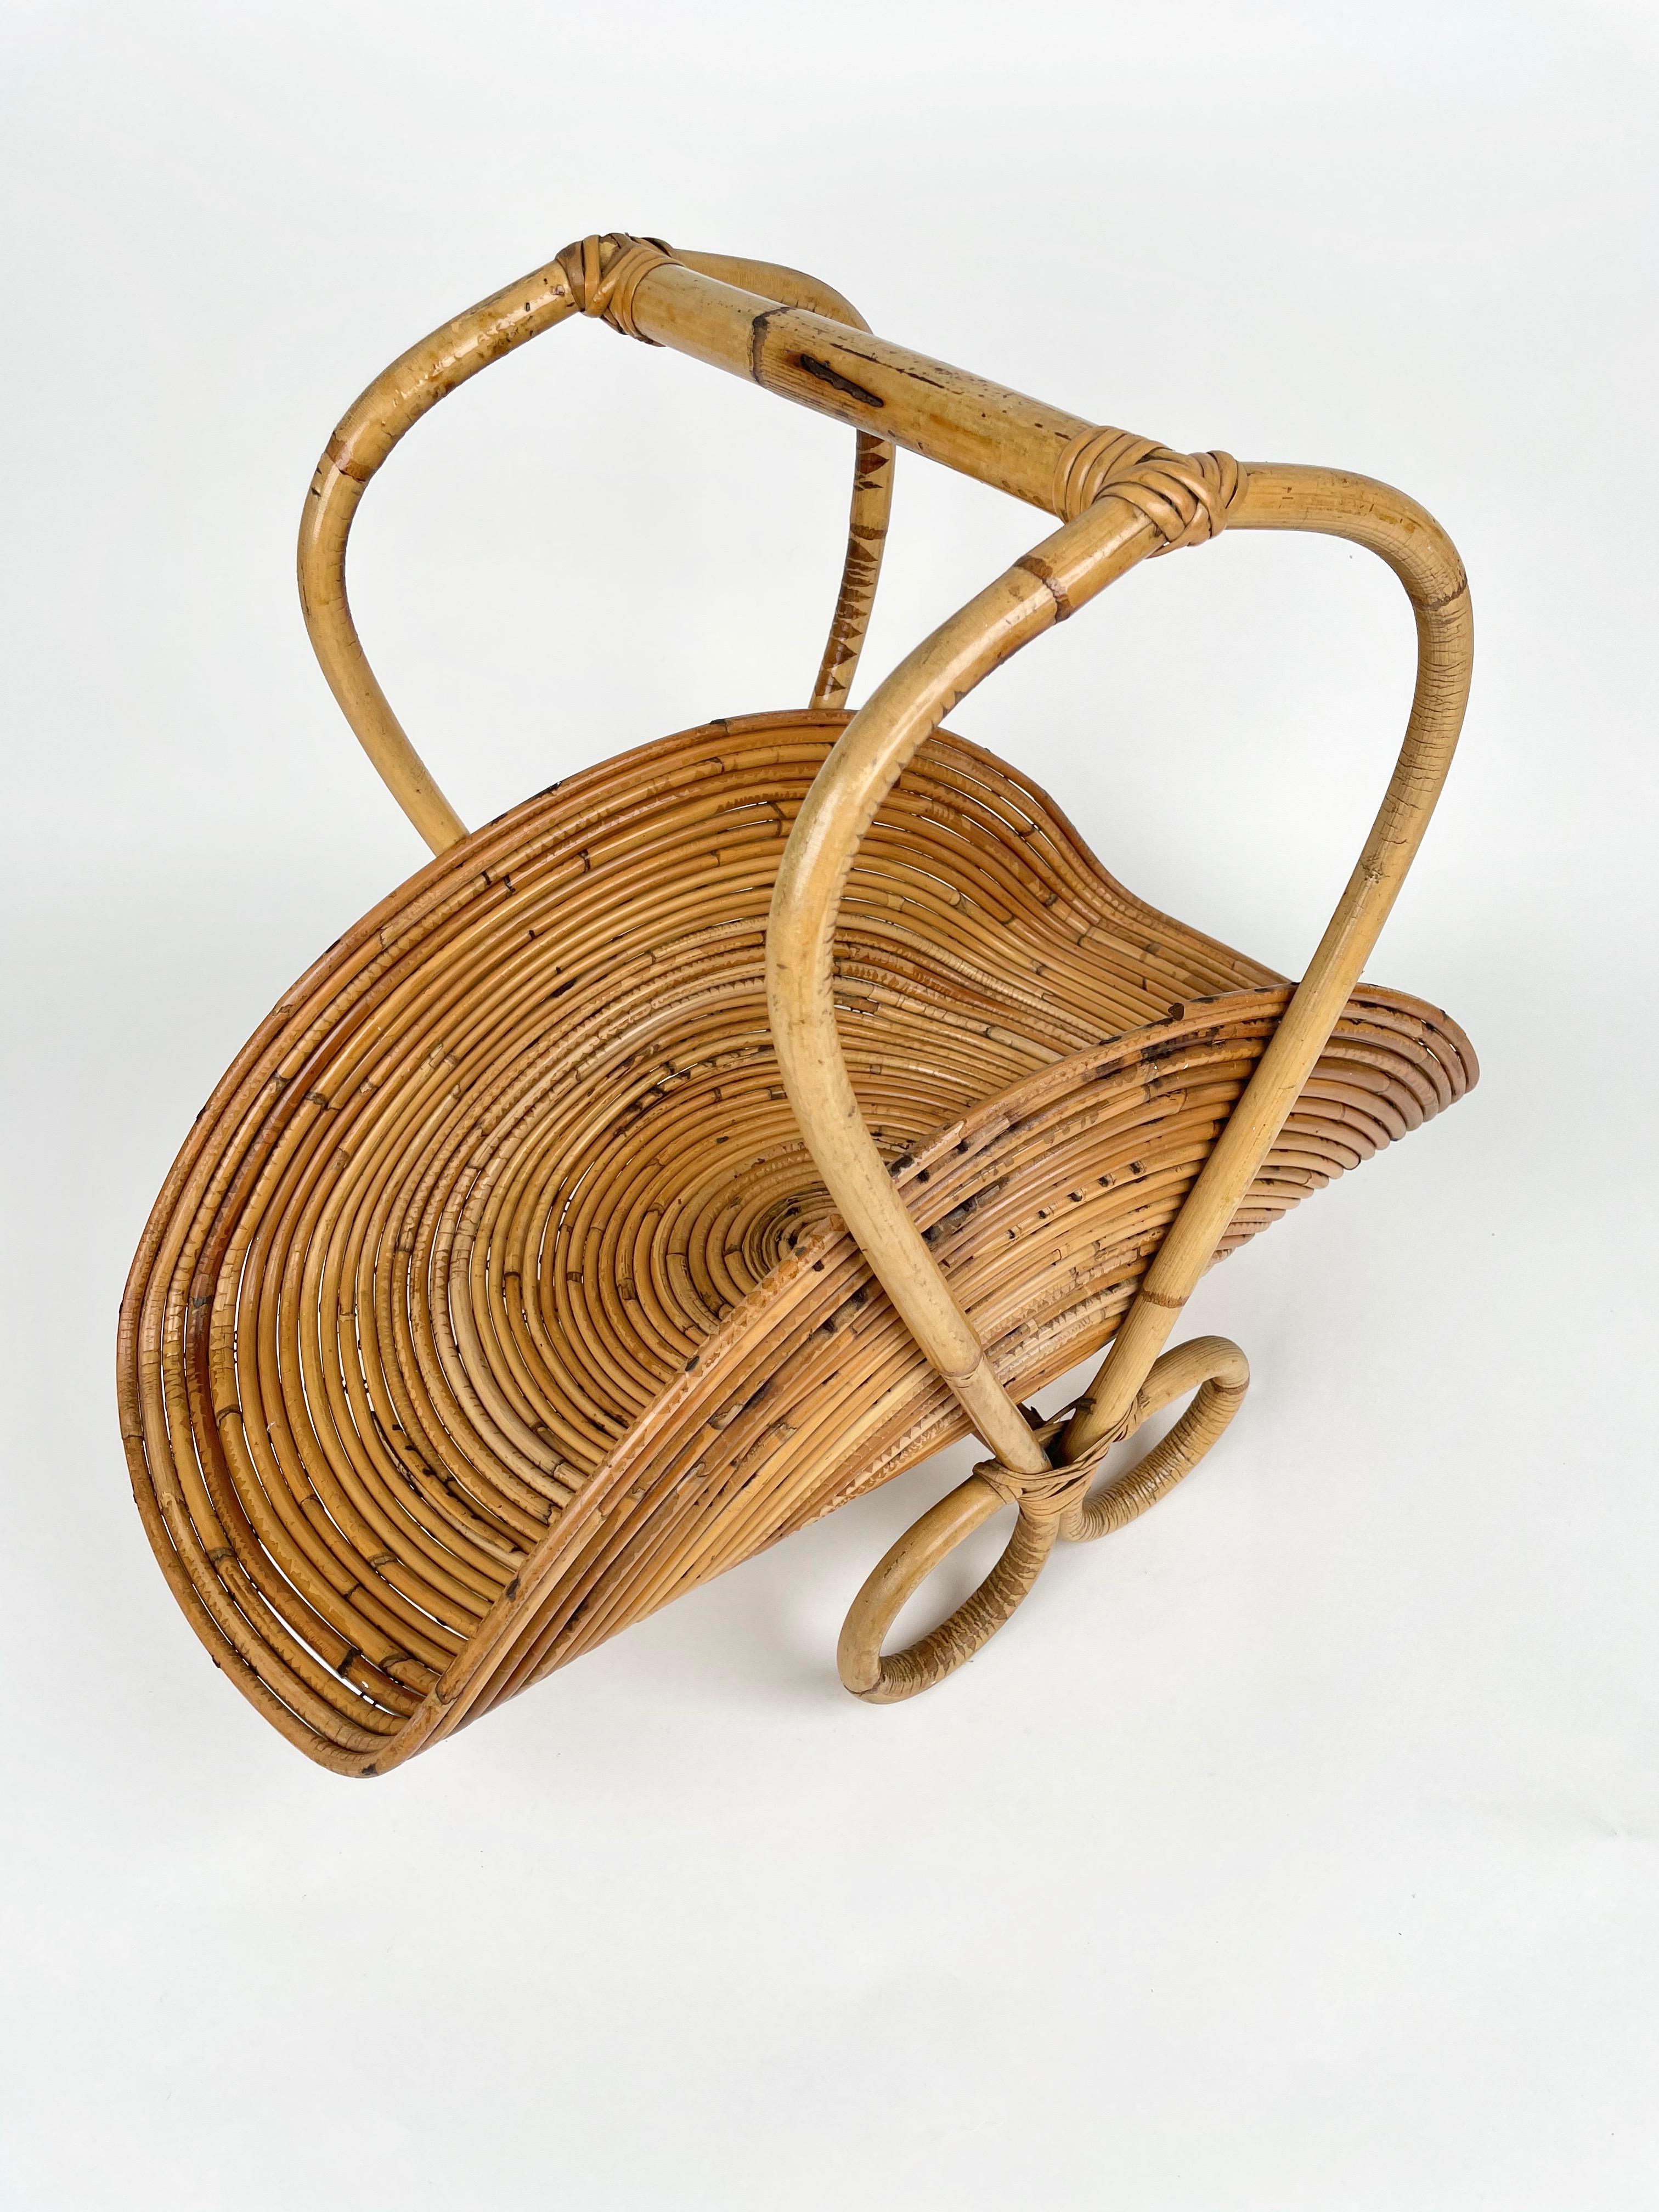 Mid-Century Modern French Riviera magazine rack in bamboo structure and curved rattan detailing produced in Italy in the 1960s.
 



 